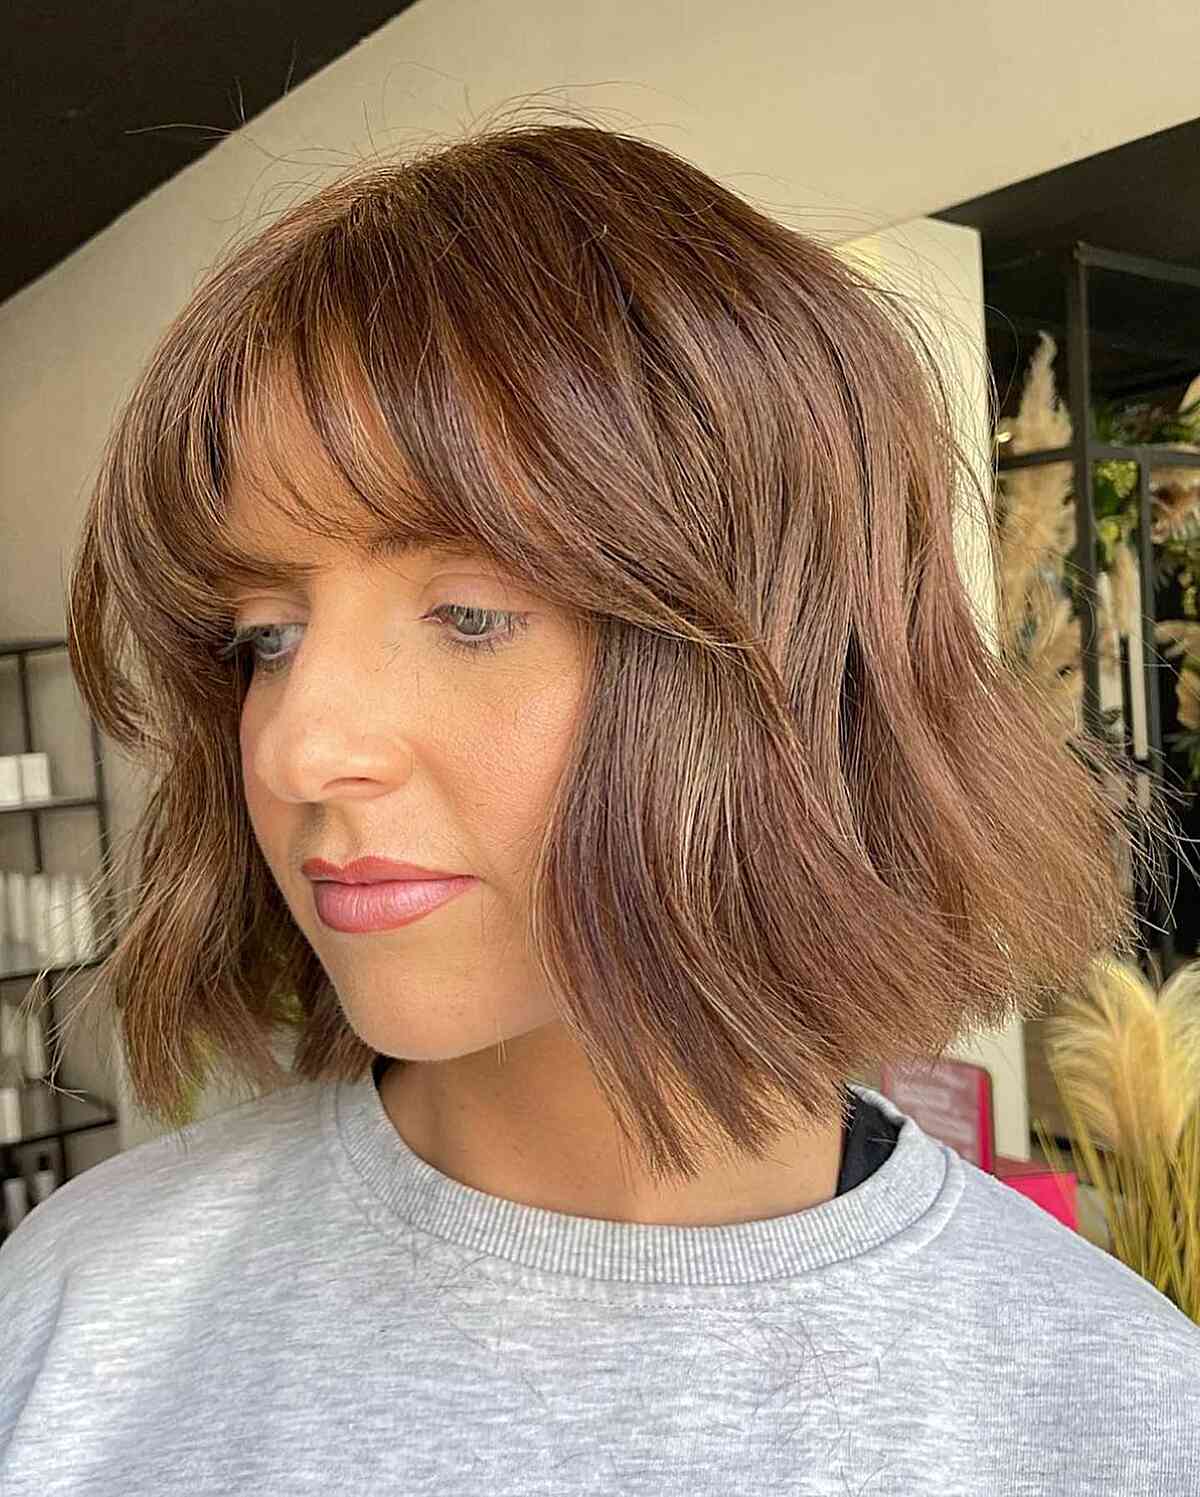 Neck-Length Short Bob with Thin French Bangs